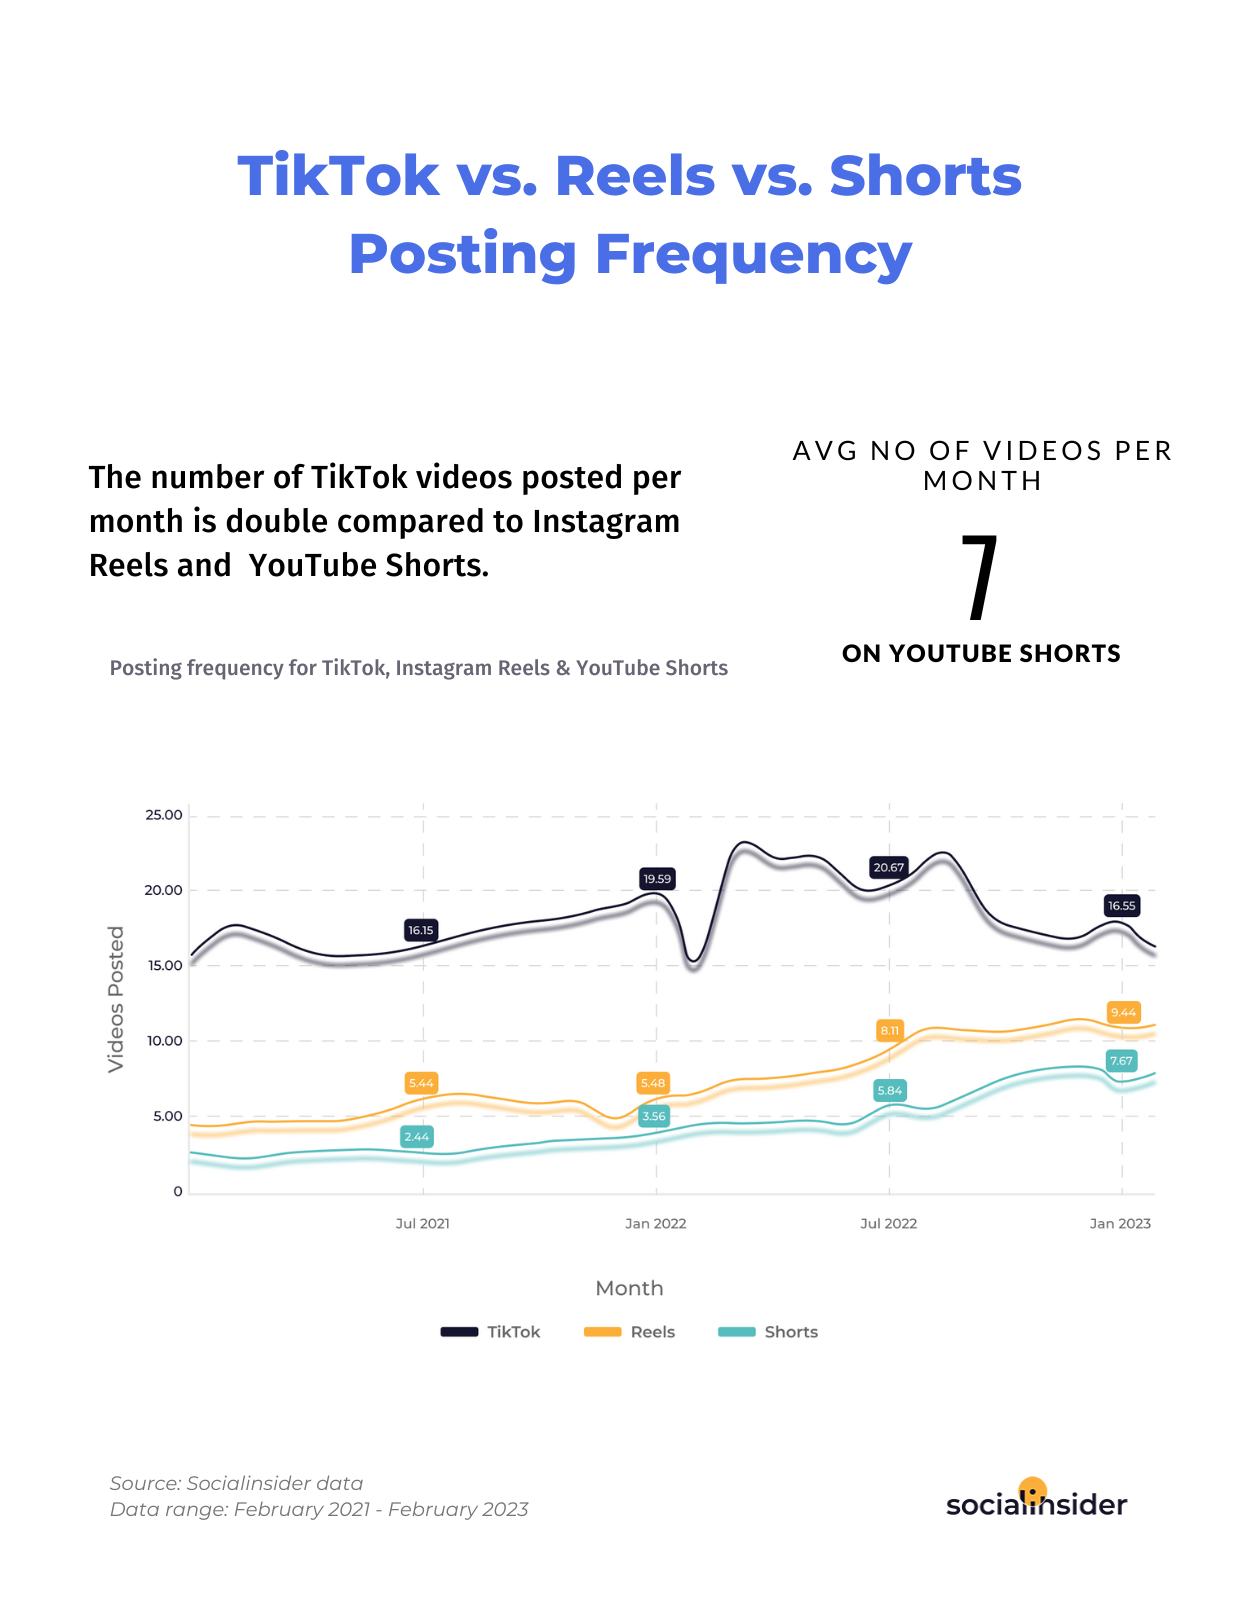 Here is a chart indicating the posting frequency for TikTok, Instagram Reels and YouTube Shorts.